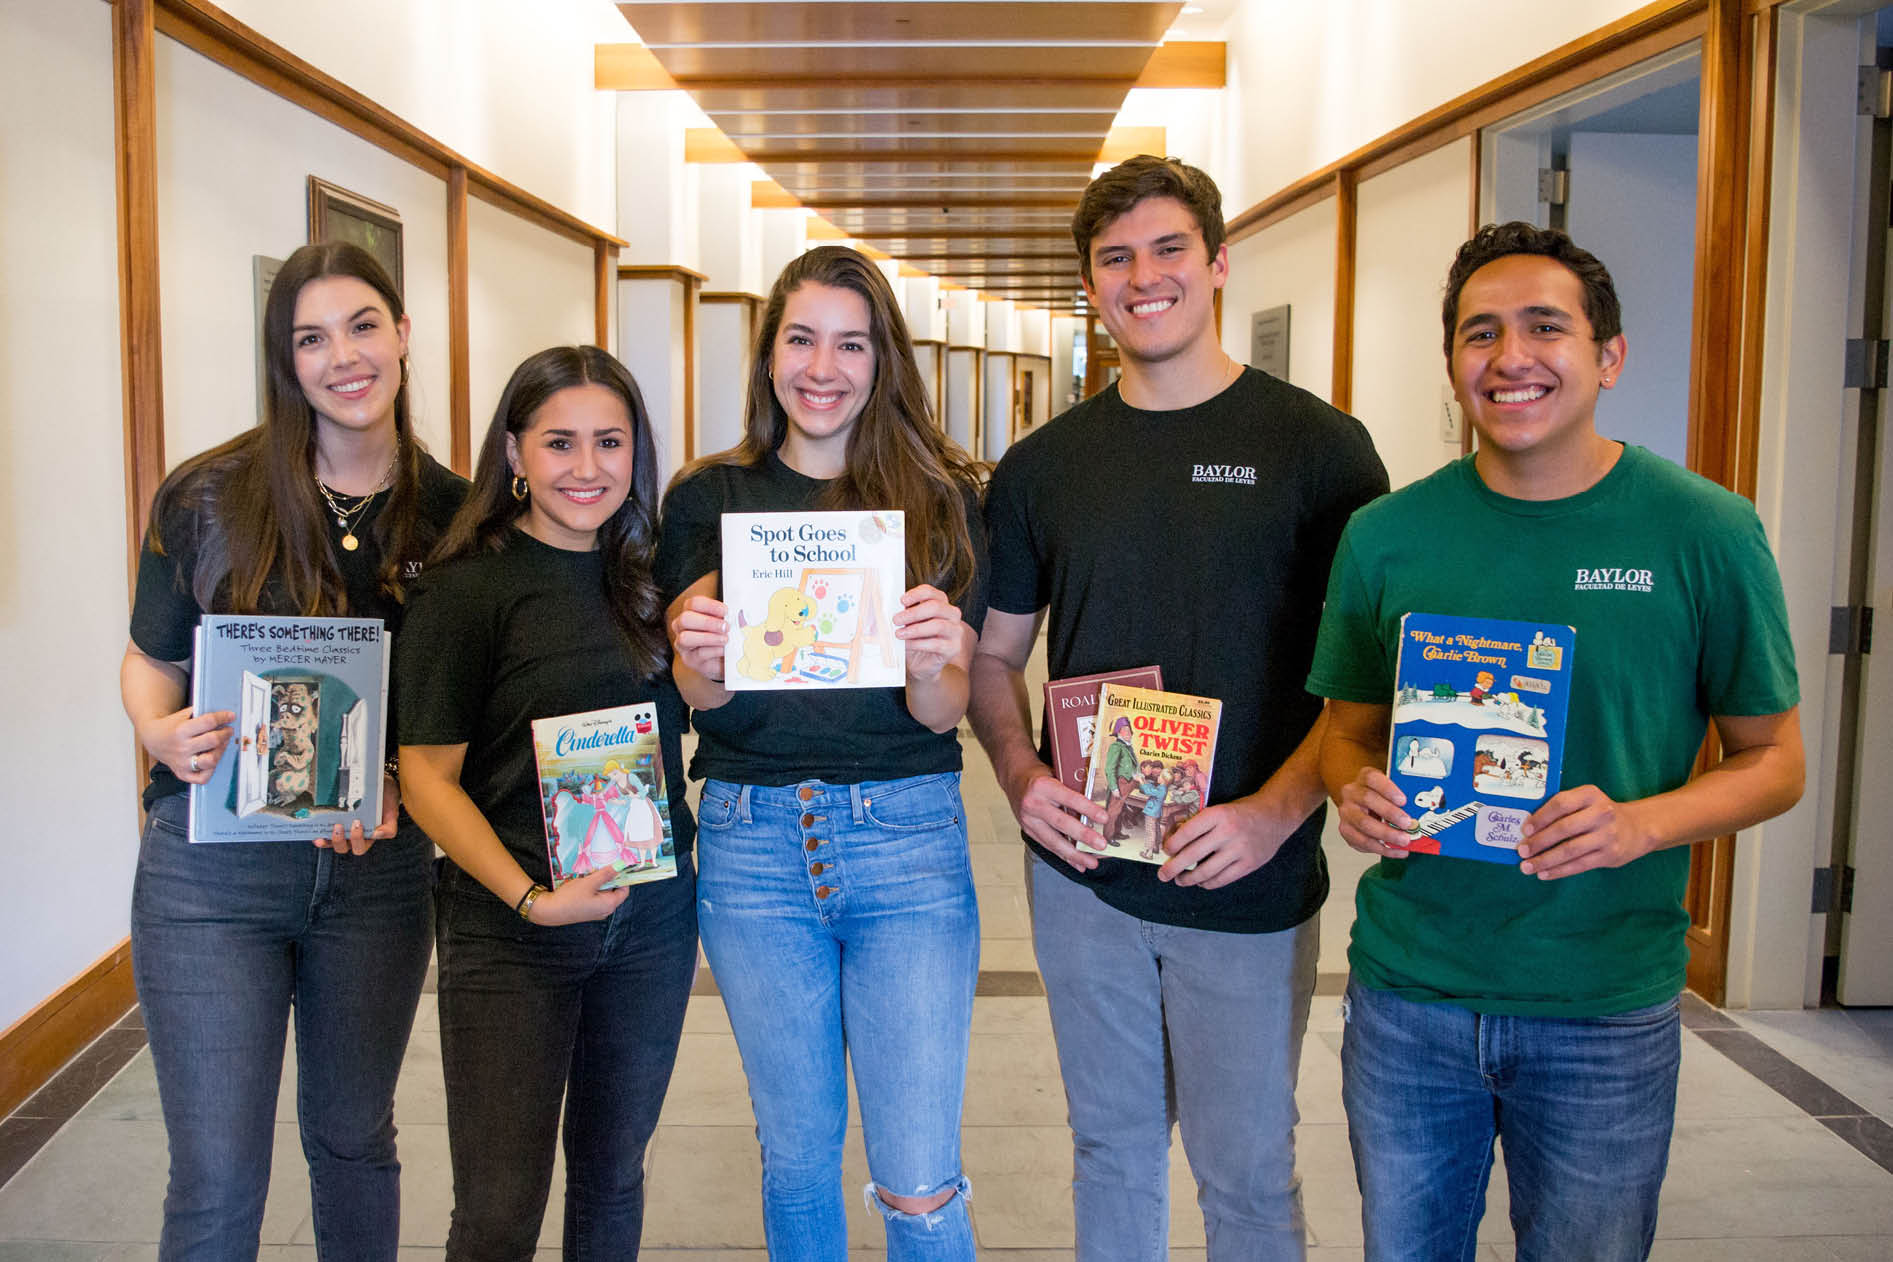 HALSA Members pose with books during book drive